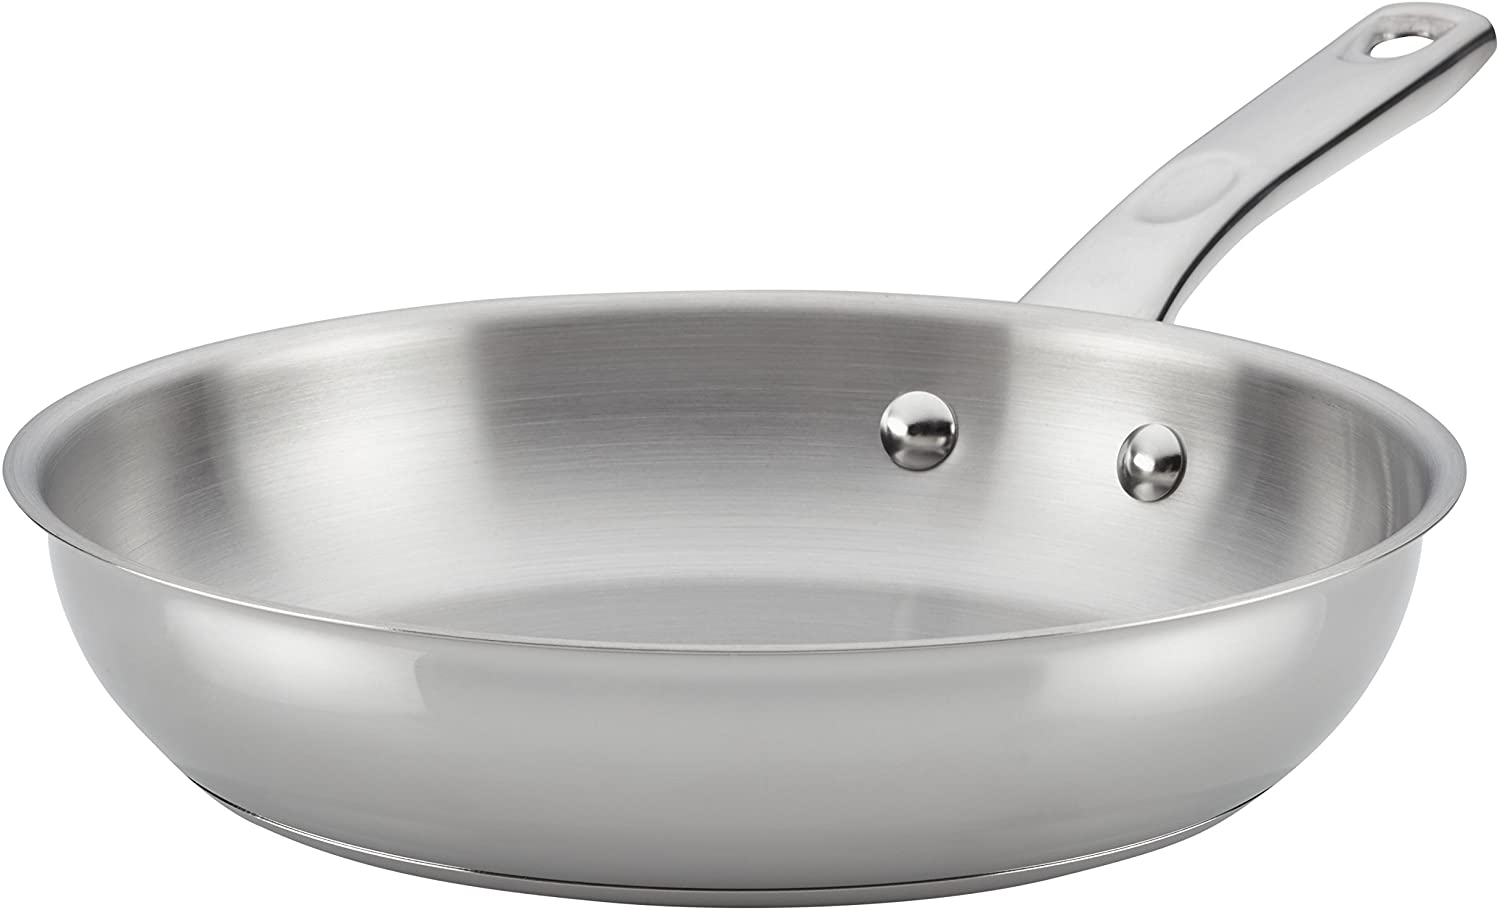 https://www.dontwasteyourmoney.com/wp-content/uploads/2019/03/ayesha-curry-70205-home-collection-stainless-steel-skillet-10-inch.jpg